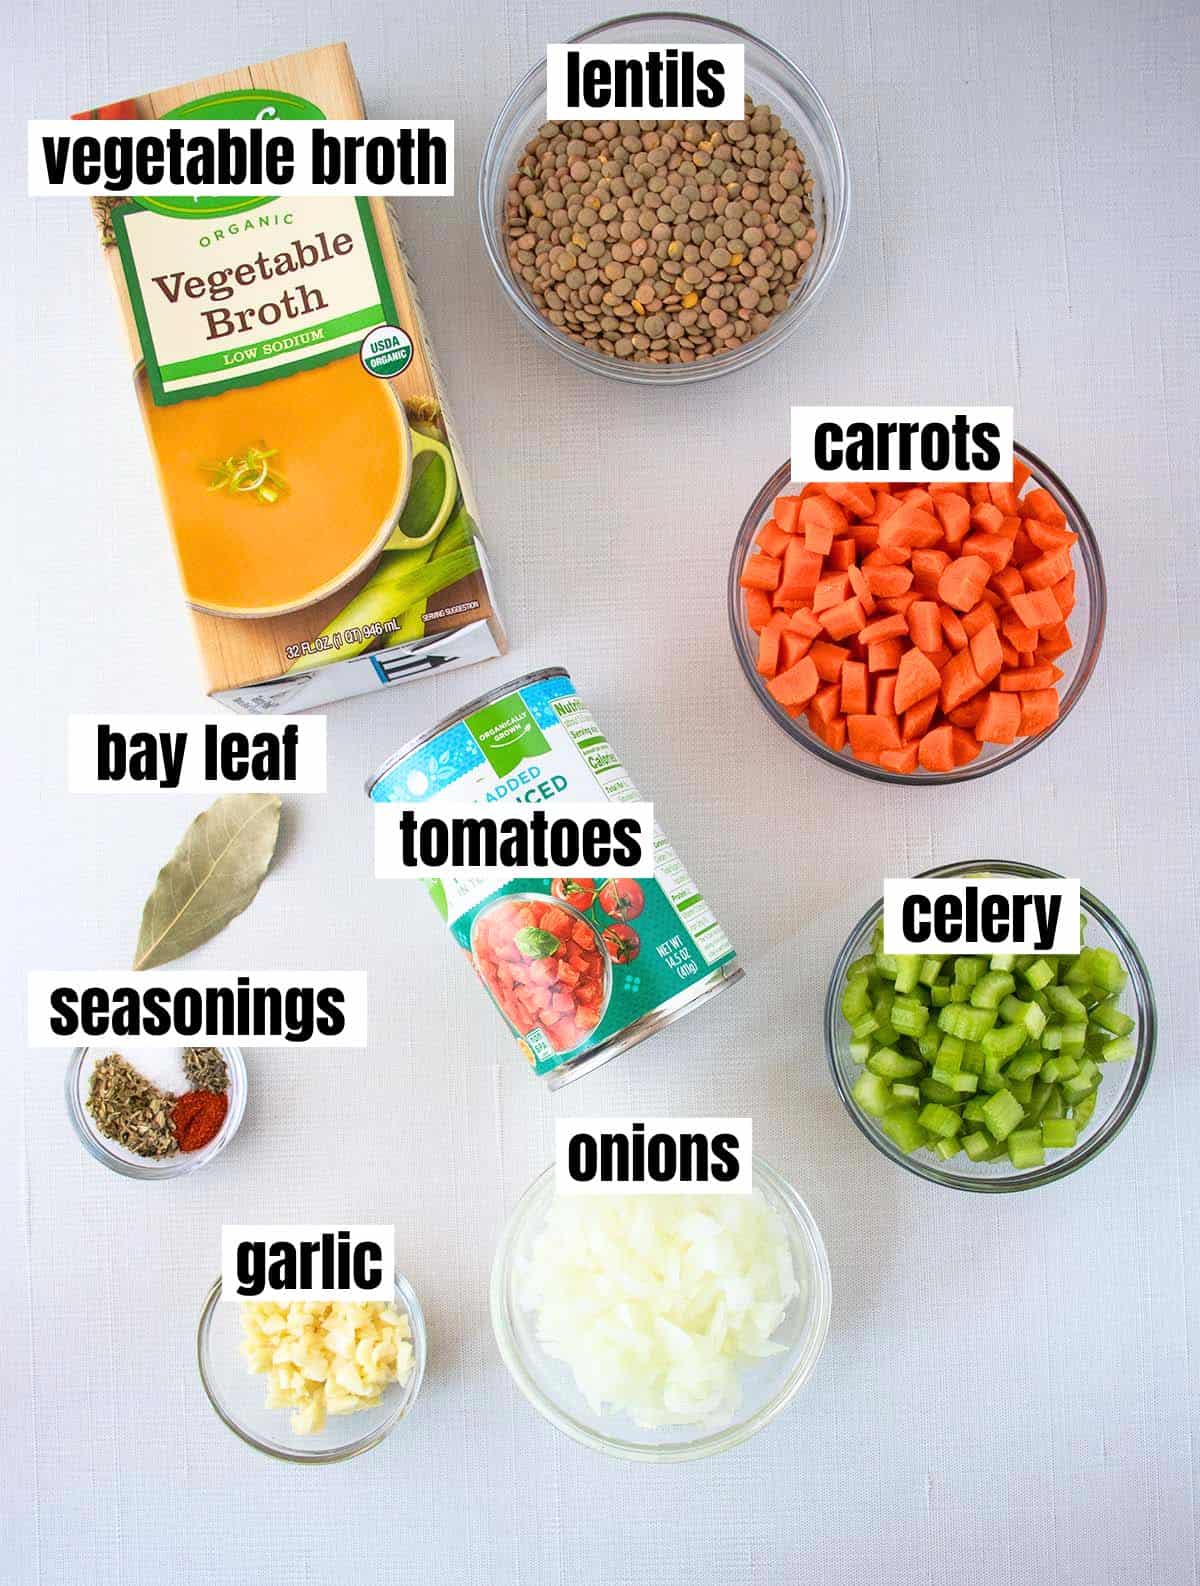 ingredients in slow cooker lentil soup which include green lentils, vegetable broth, carrots, celery, onions, garlic, canned diced tomatoes, seasonings, bay leaf.